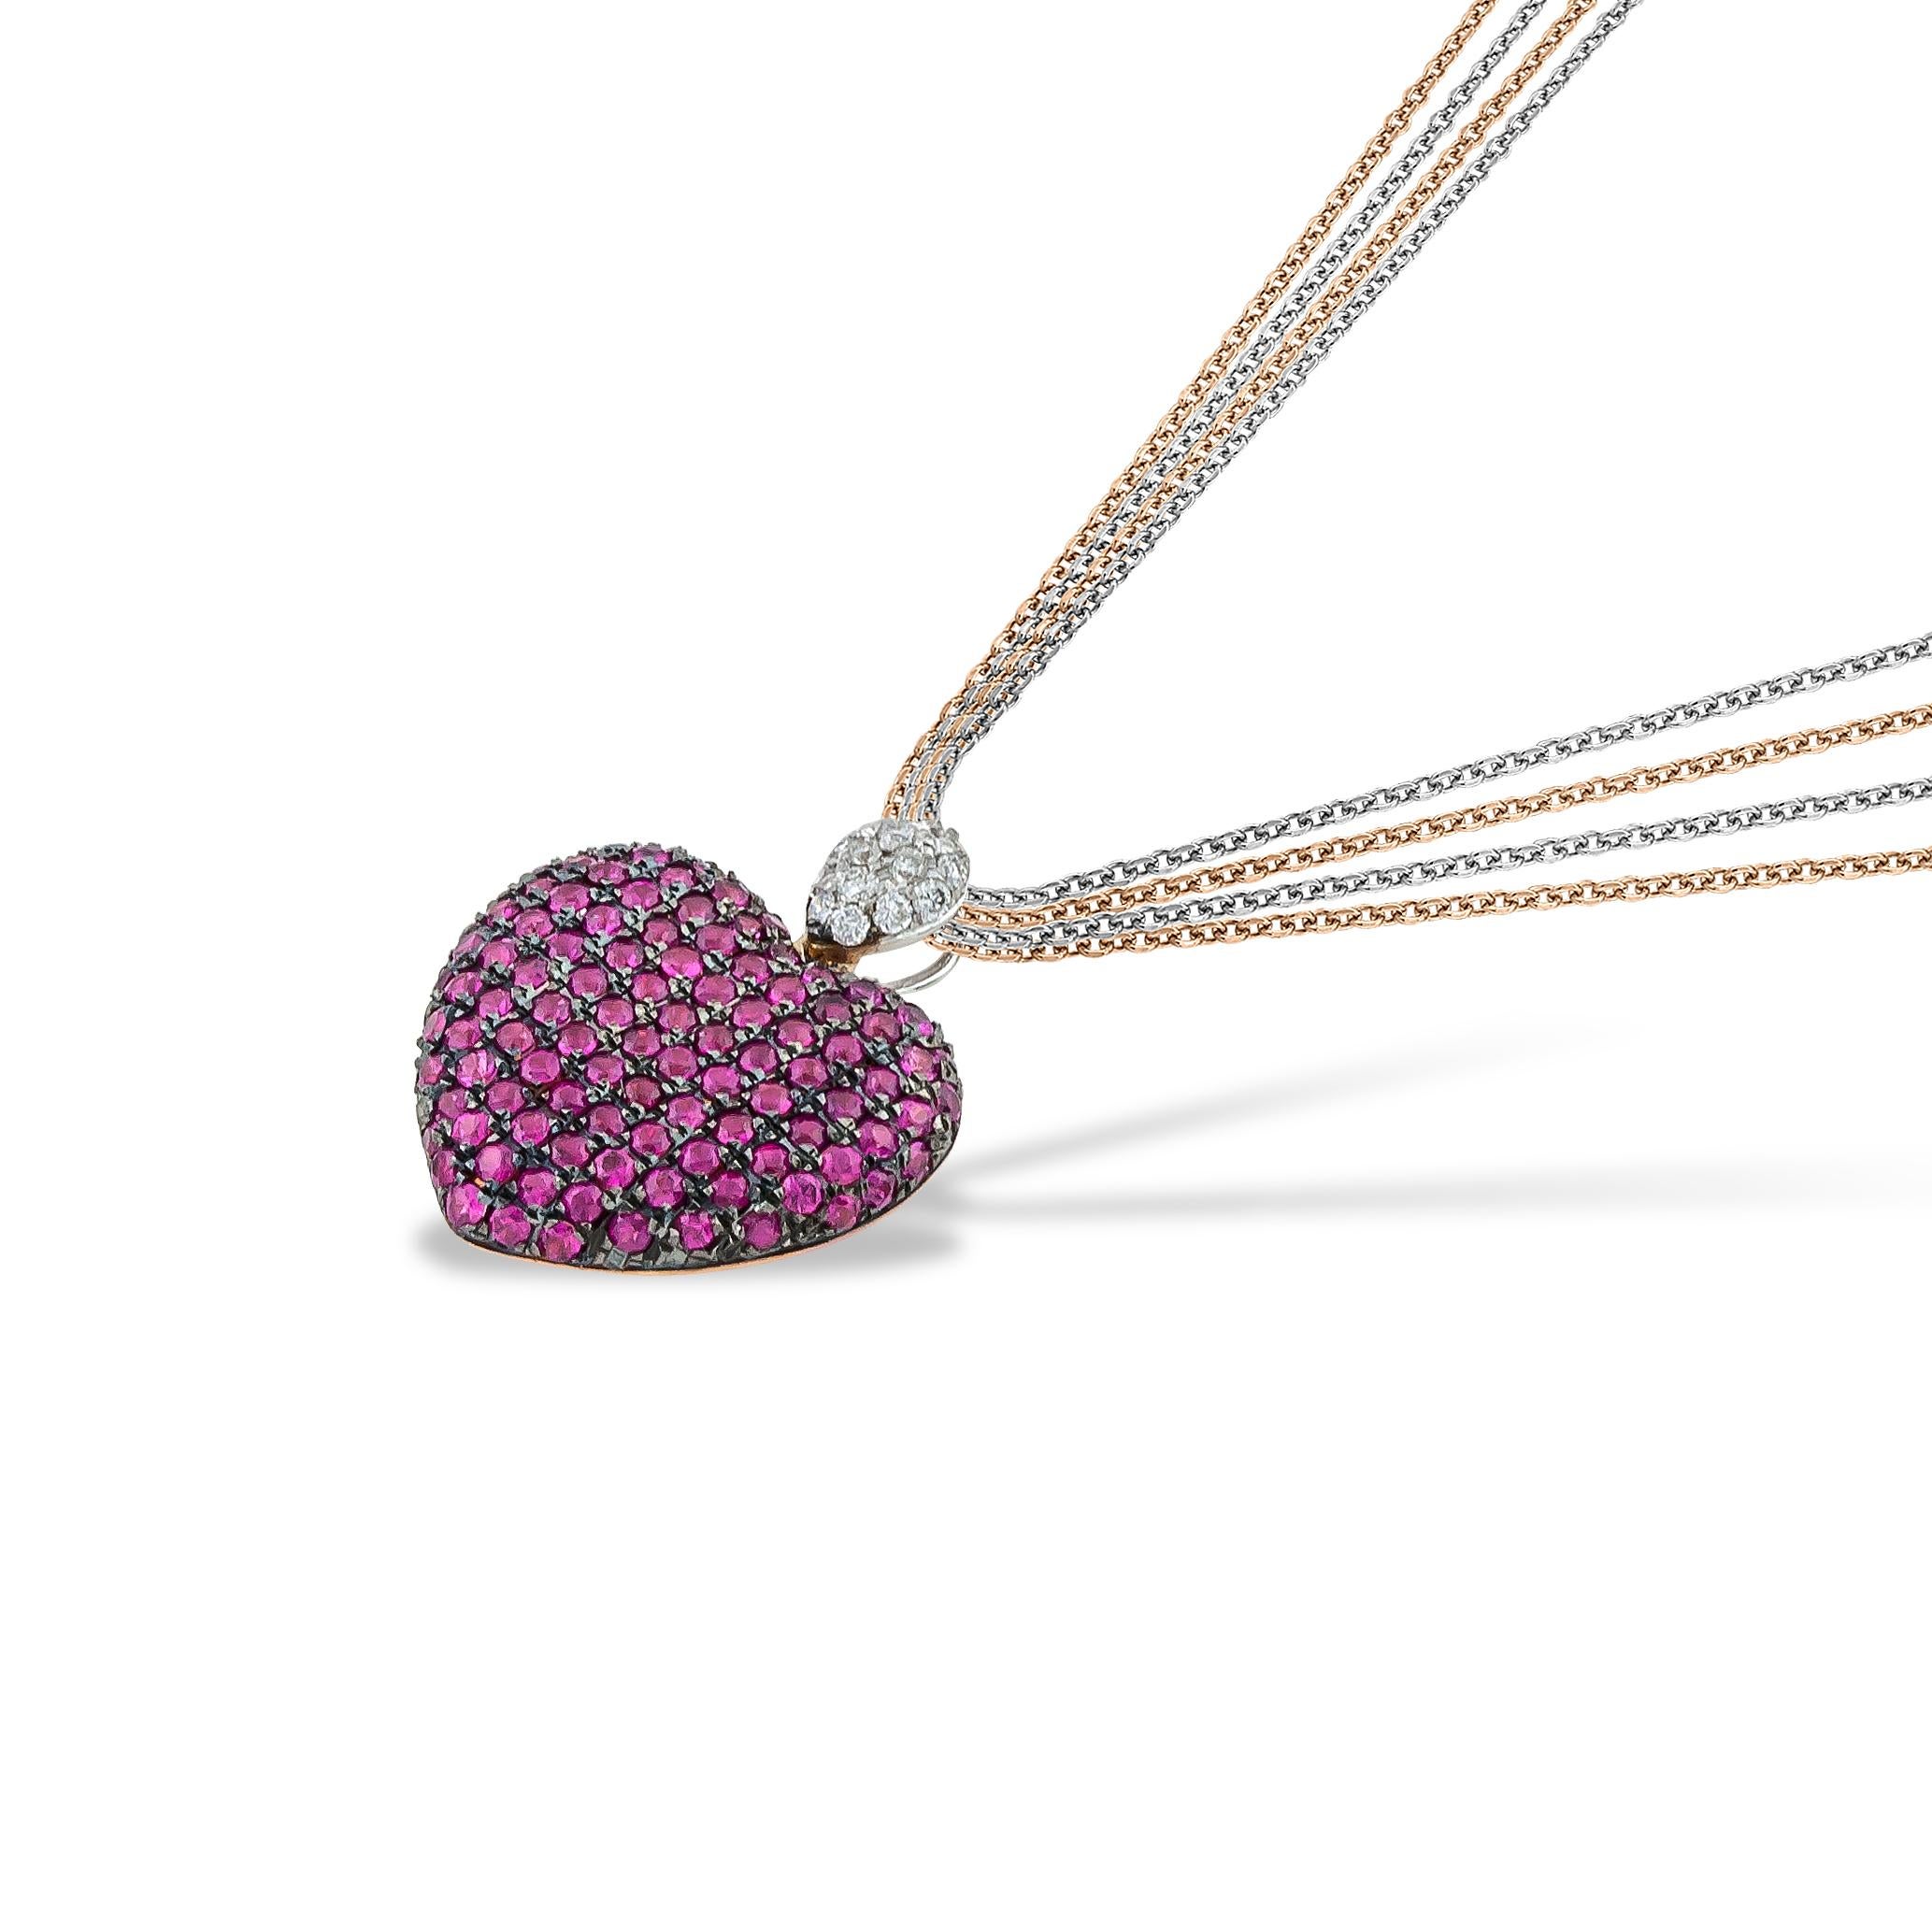 Red Heart Pave setting, with Pink Sapphires and Diamonds.This Heart Pendant - Necklace is handcrafted in 18kt Rose Gold. This Heart pendant comes with Multi Chain ( 2x rose and 2x white gold diamond cut rolo chain). This Heart belongs to